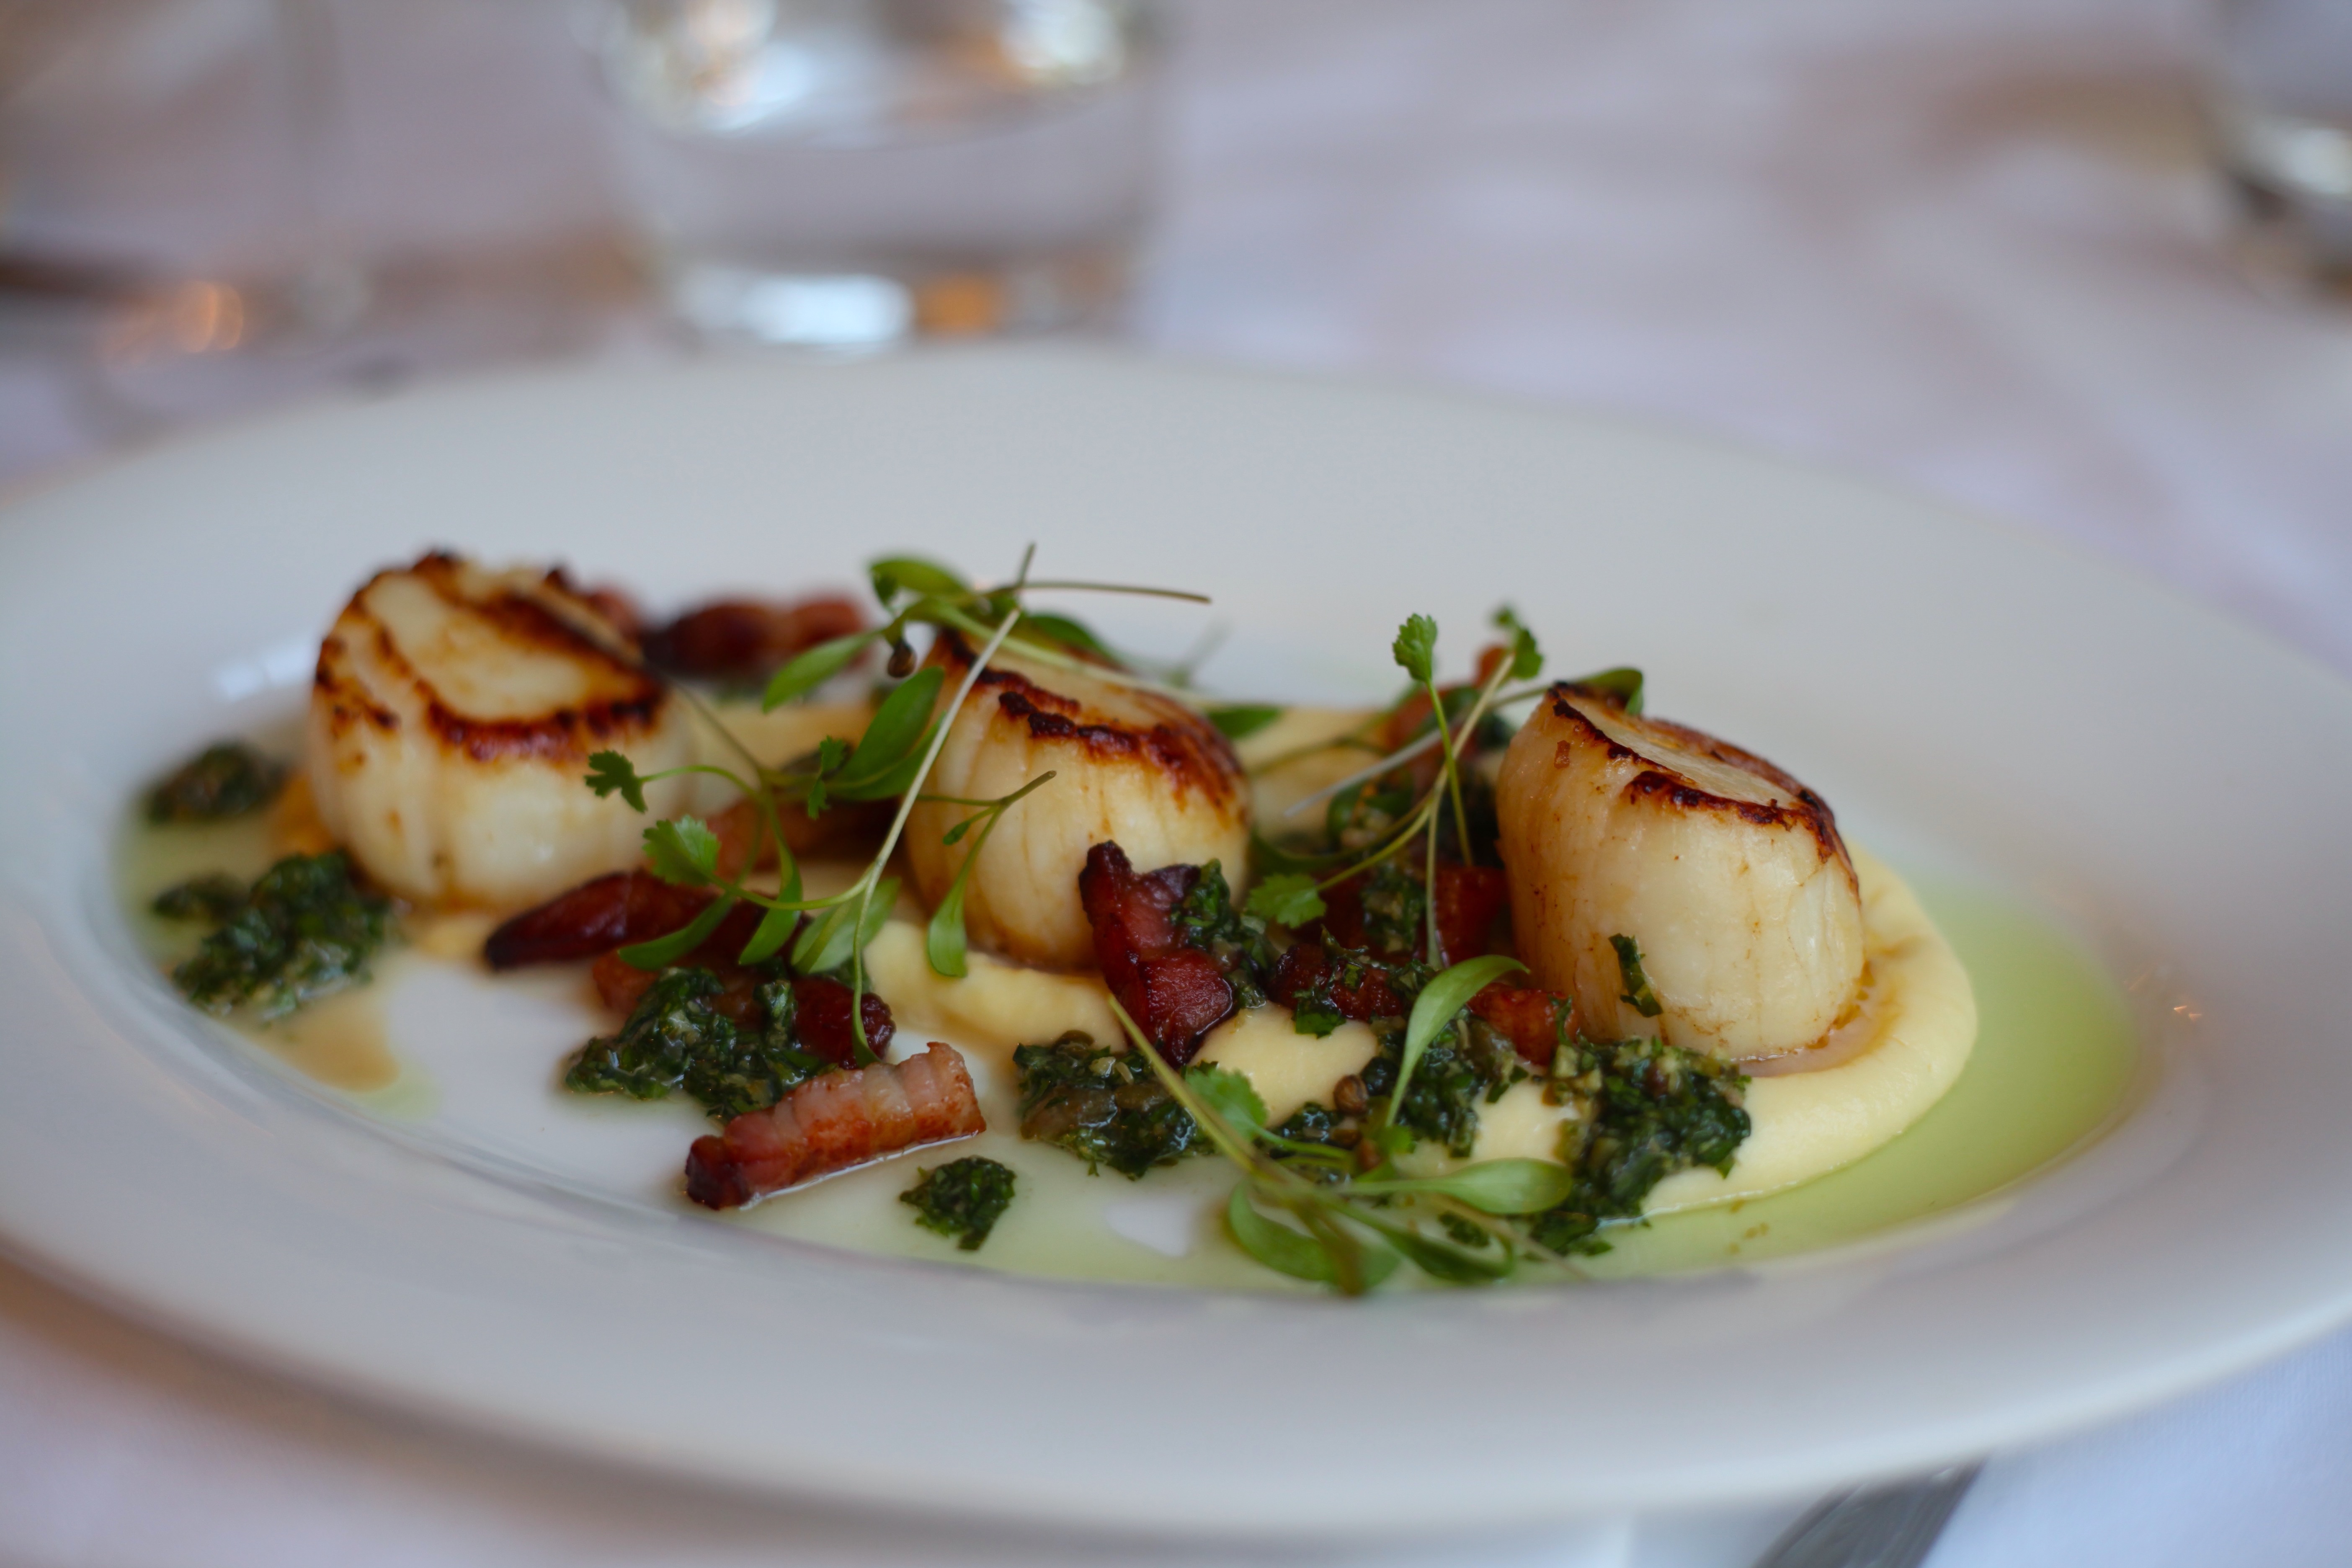 Plate of scallops with salsa verde and bacon with creamed celeriac